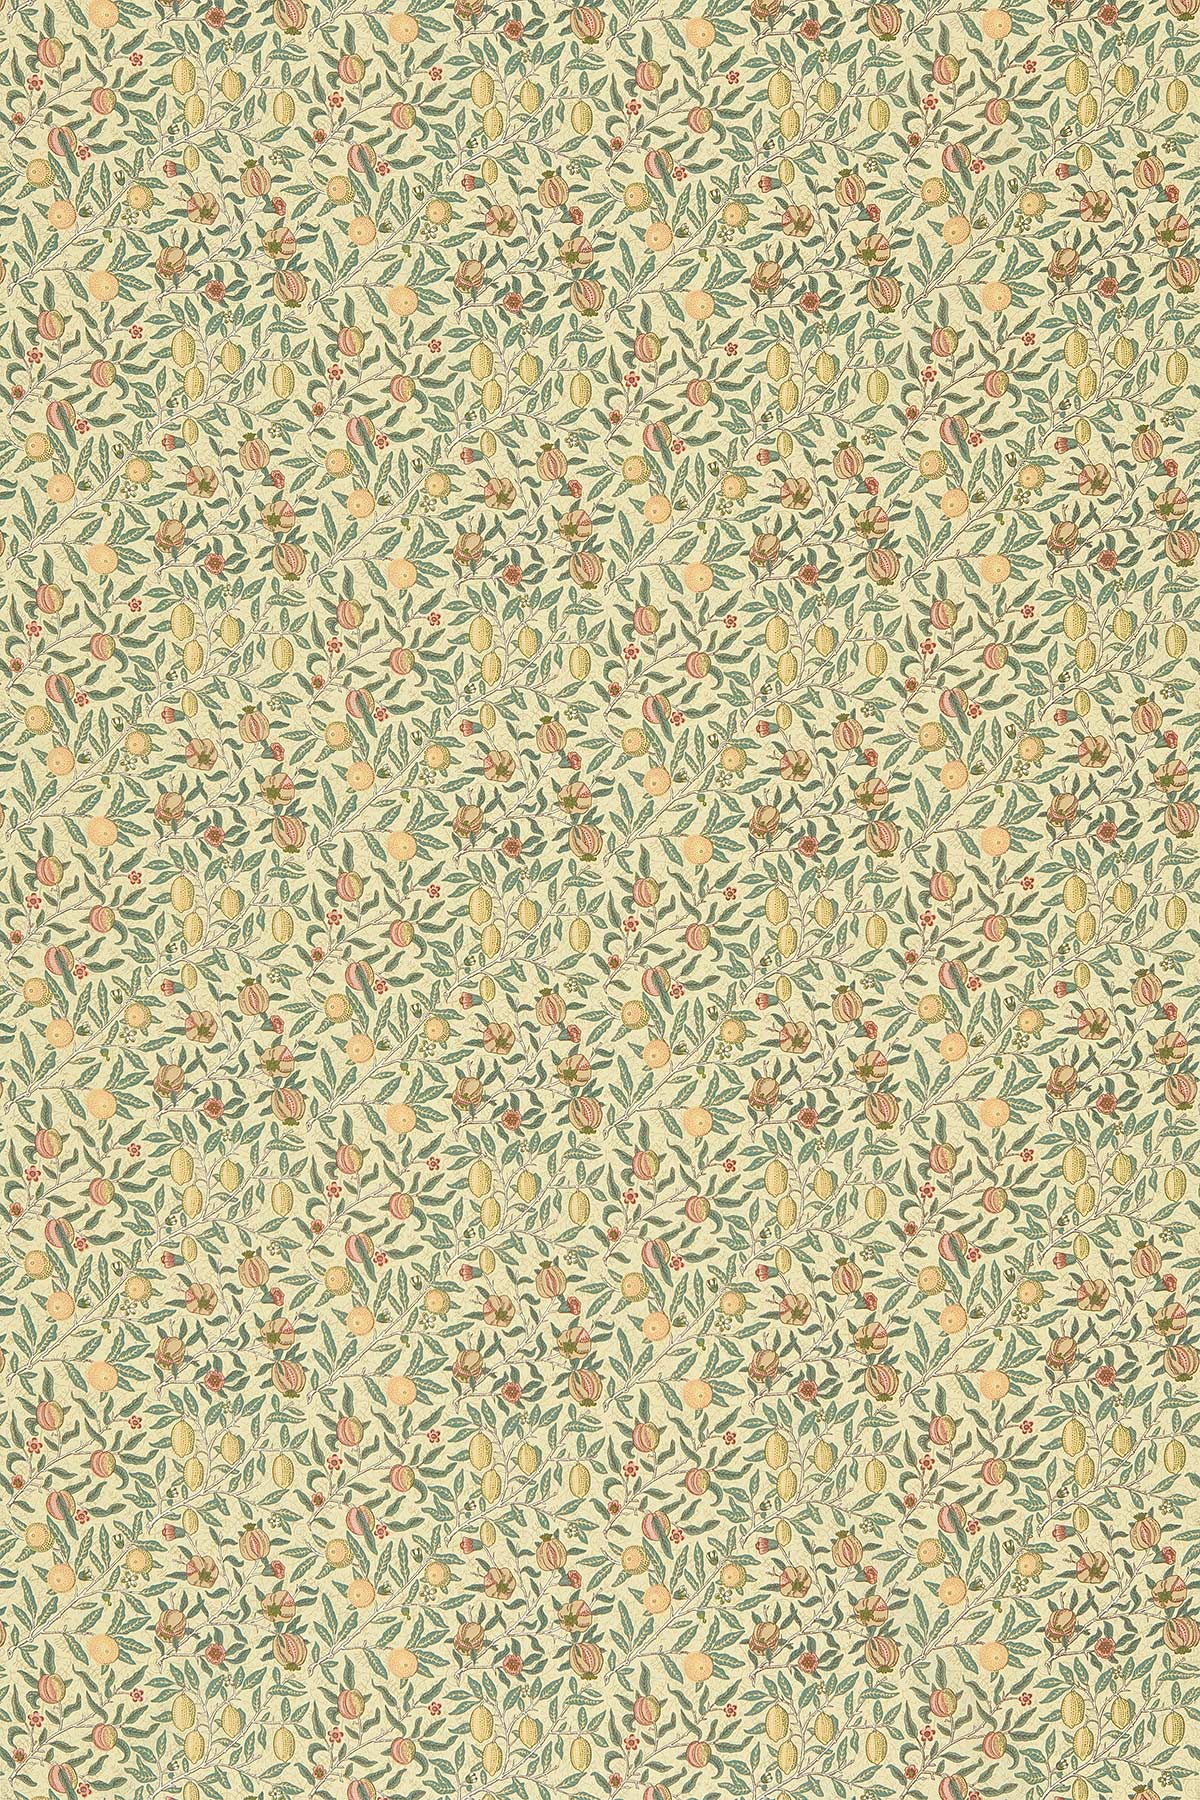 Fruit Minor Fabric - Ivory / Teal - by Morris